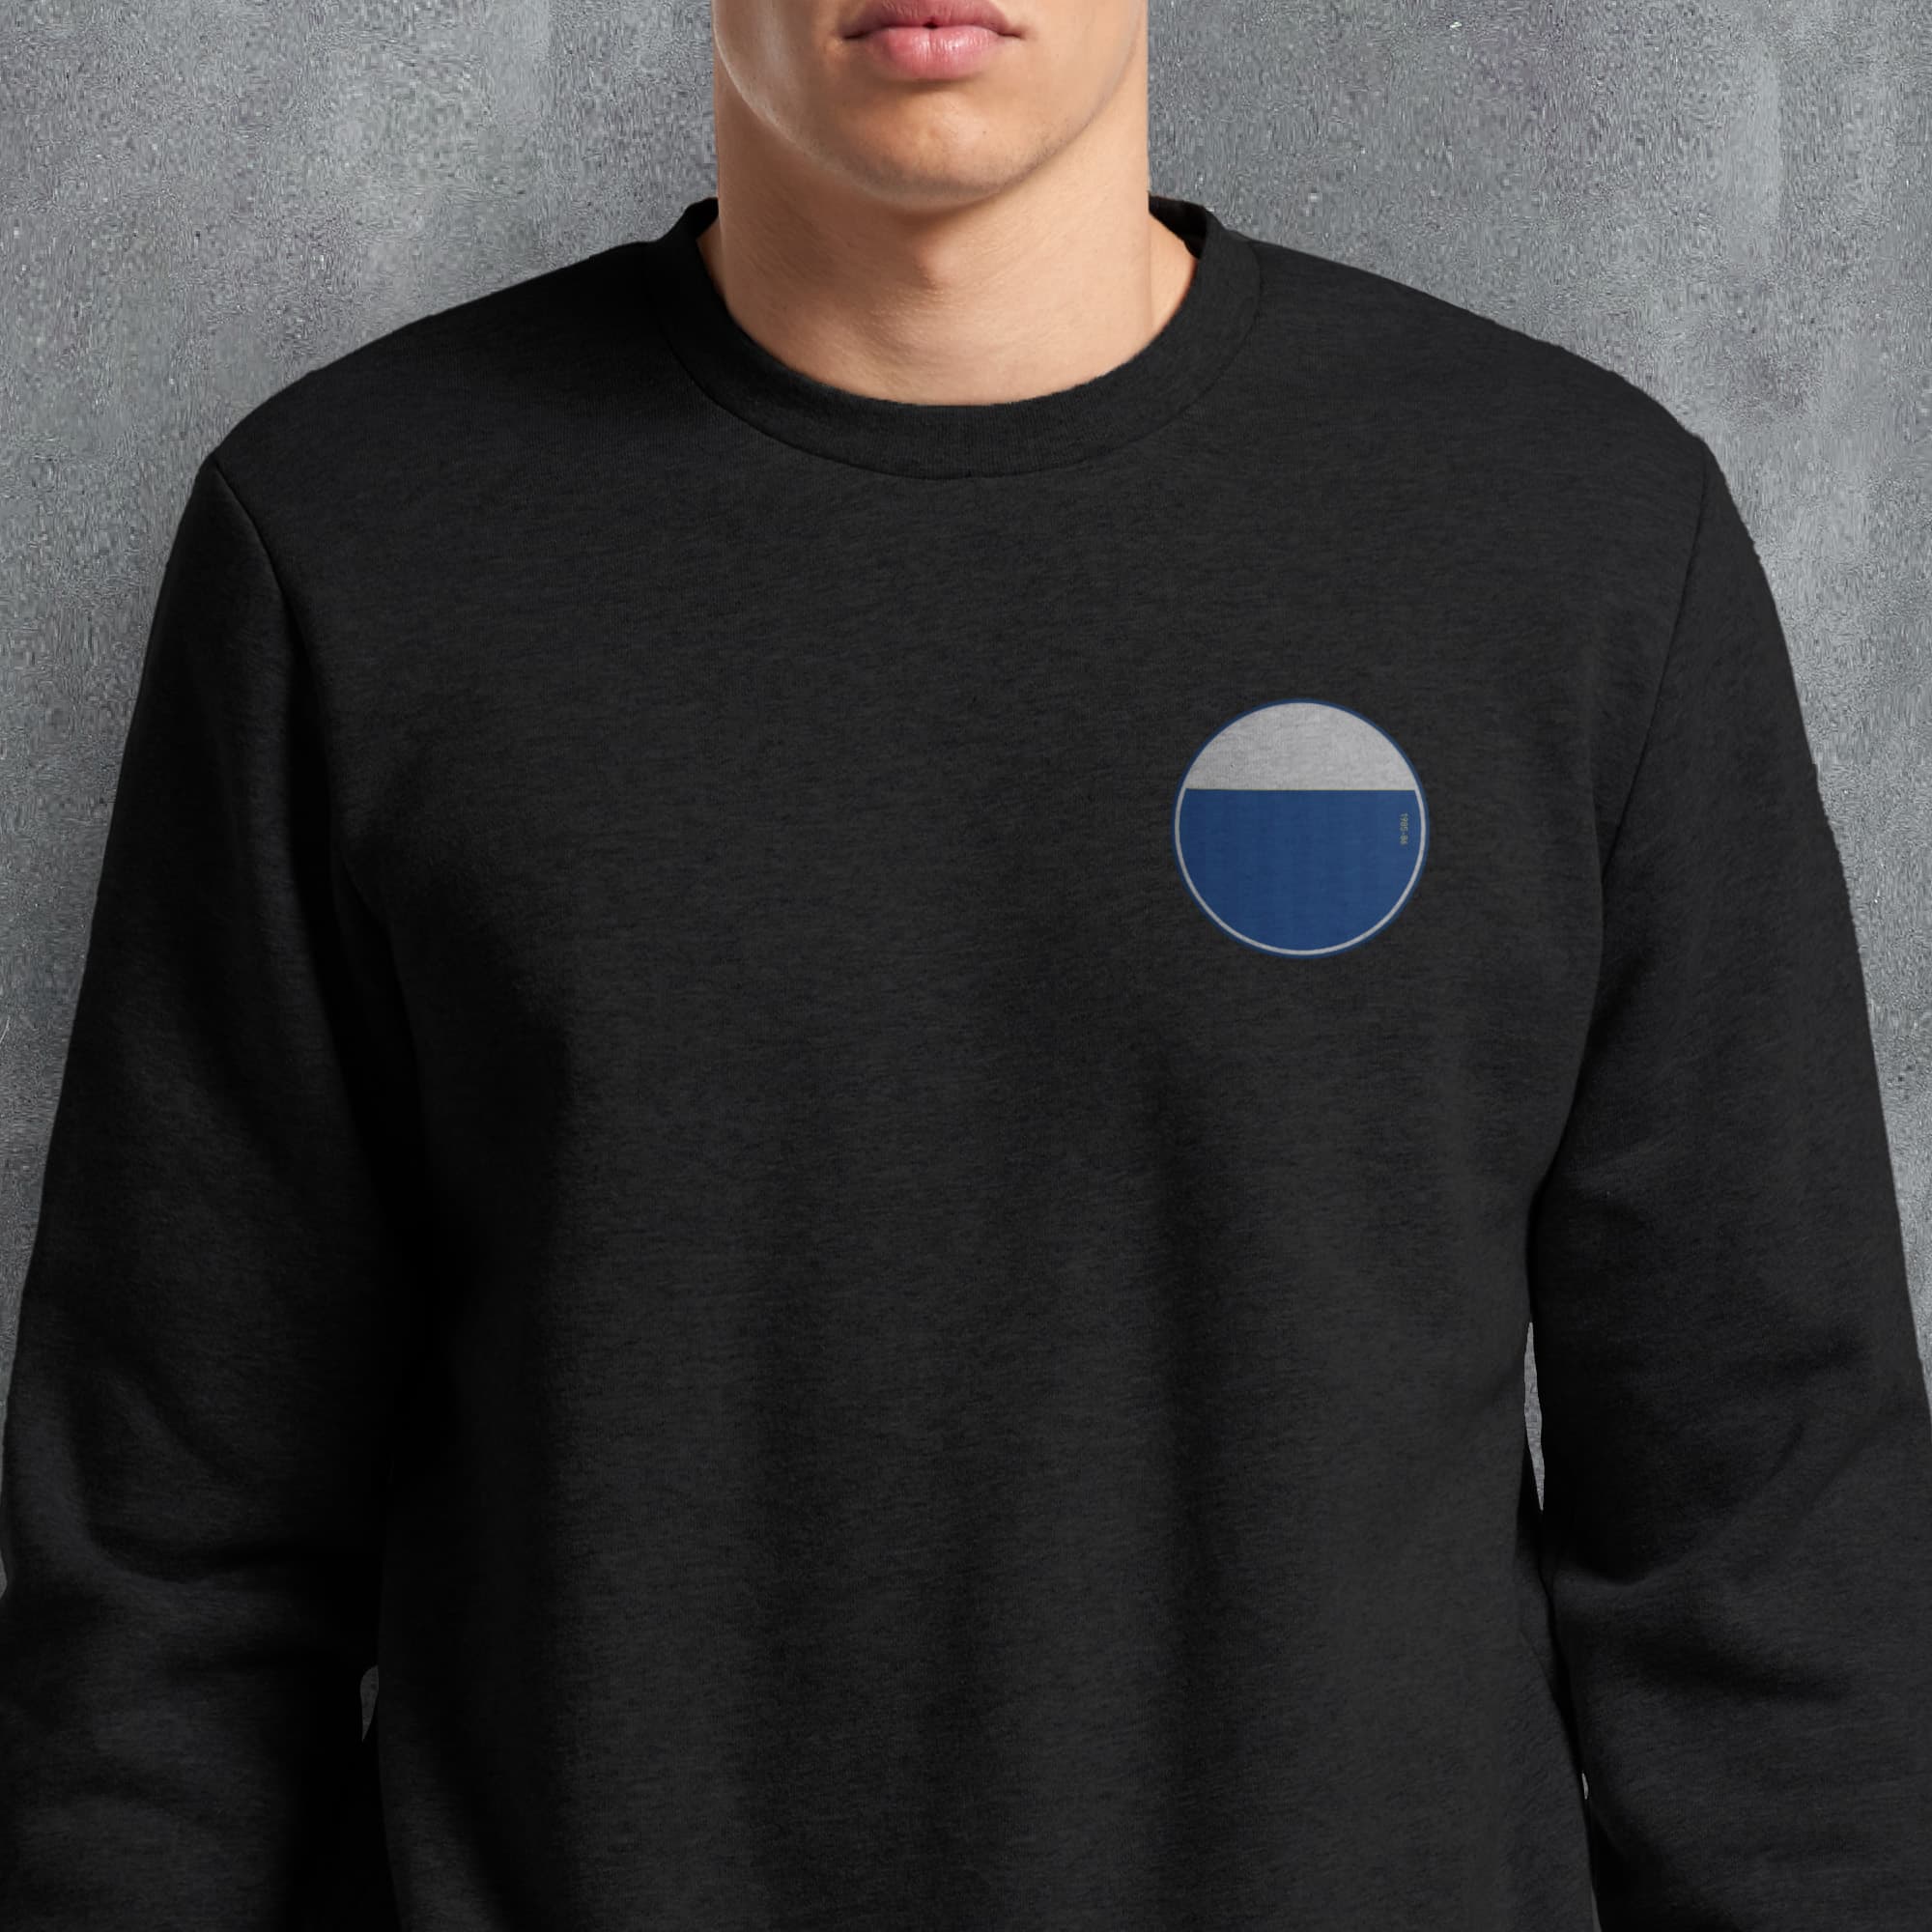 a man wearing a black sweatshirt with a blue circle on it